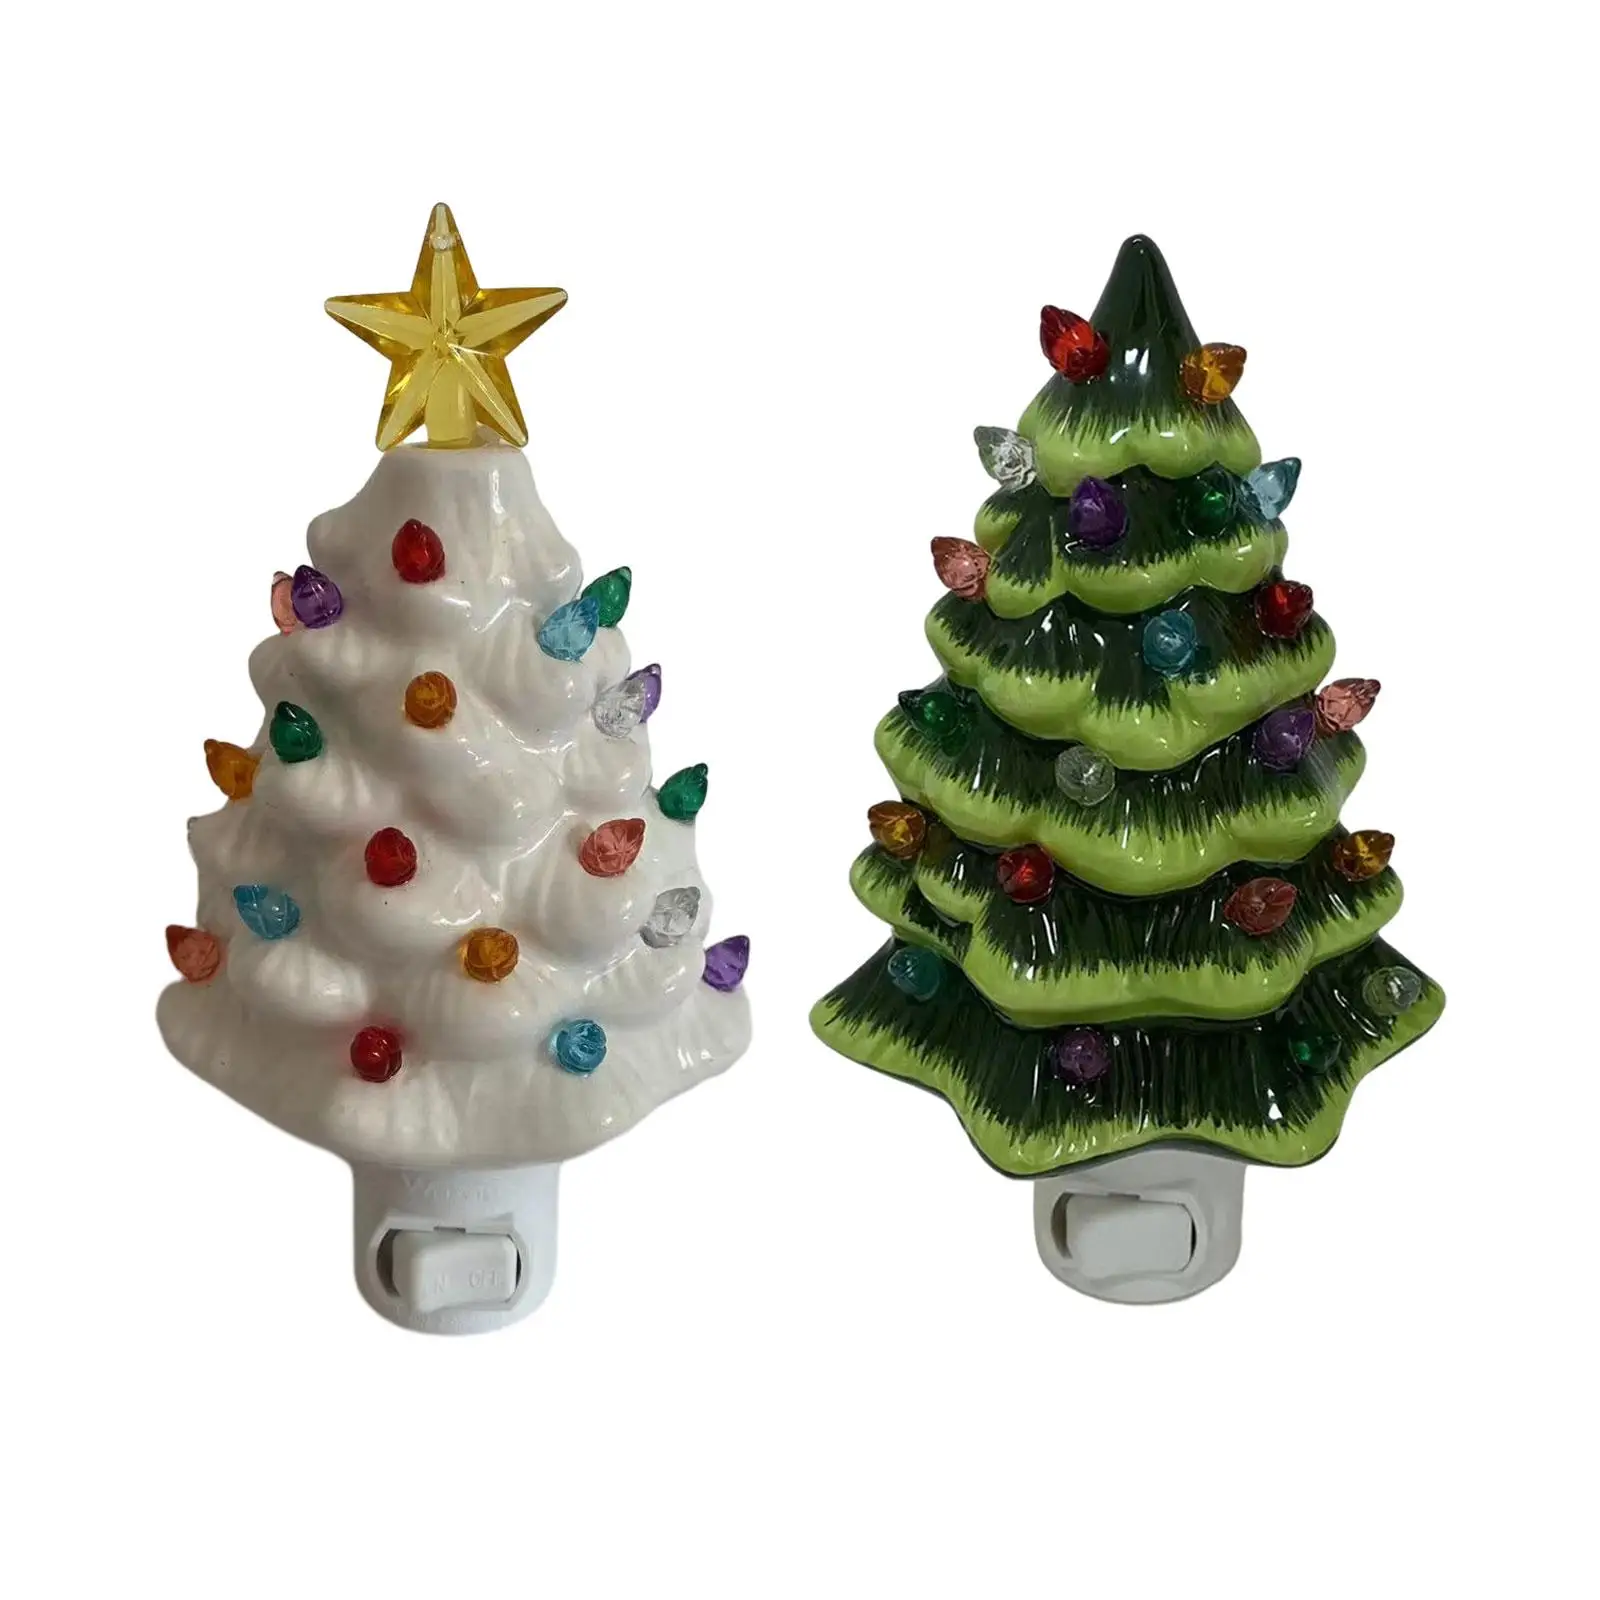 2023 Christmas Tree Night Light Ceramic with Lamp Nostalgic Xmas Decorations for Theme Party Decor Bedroom Indoor Bedside Table